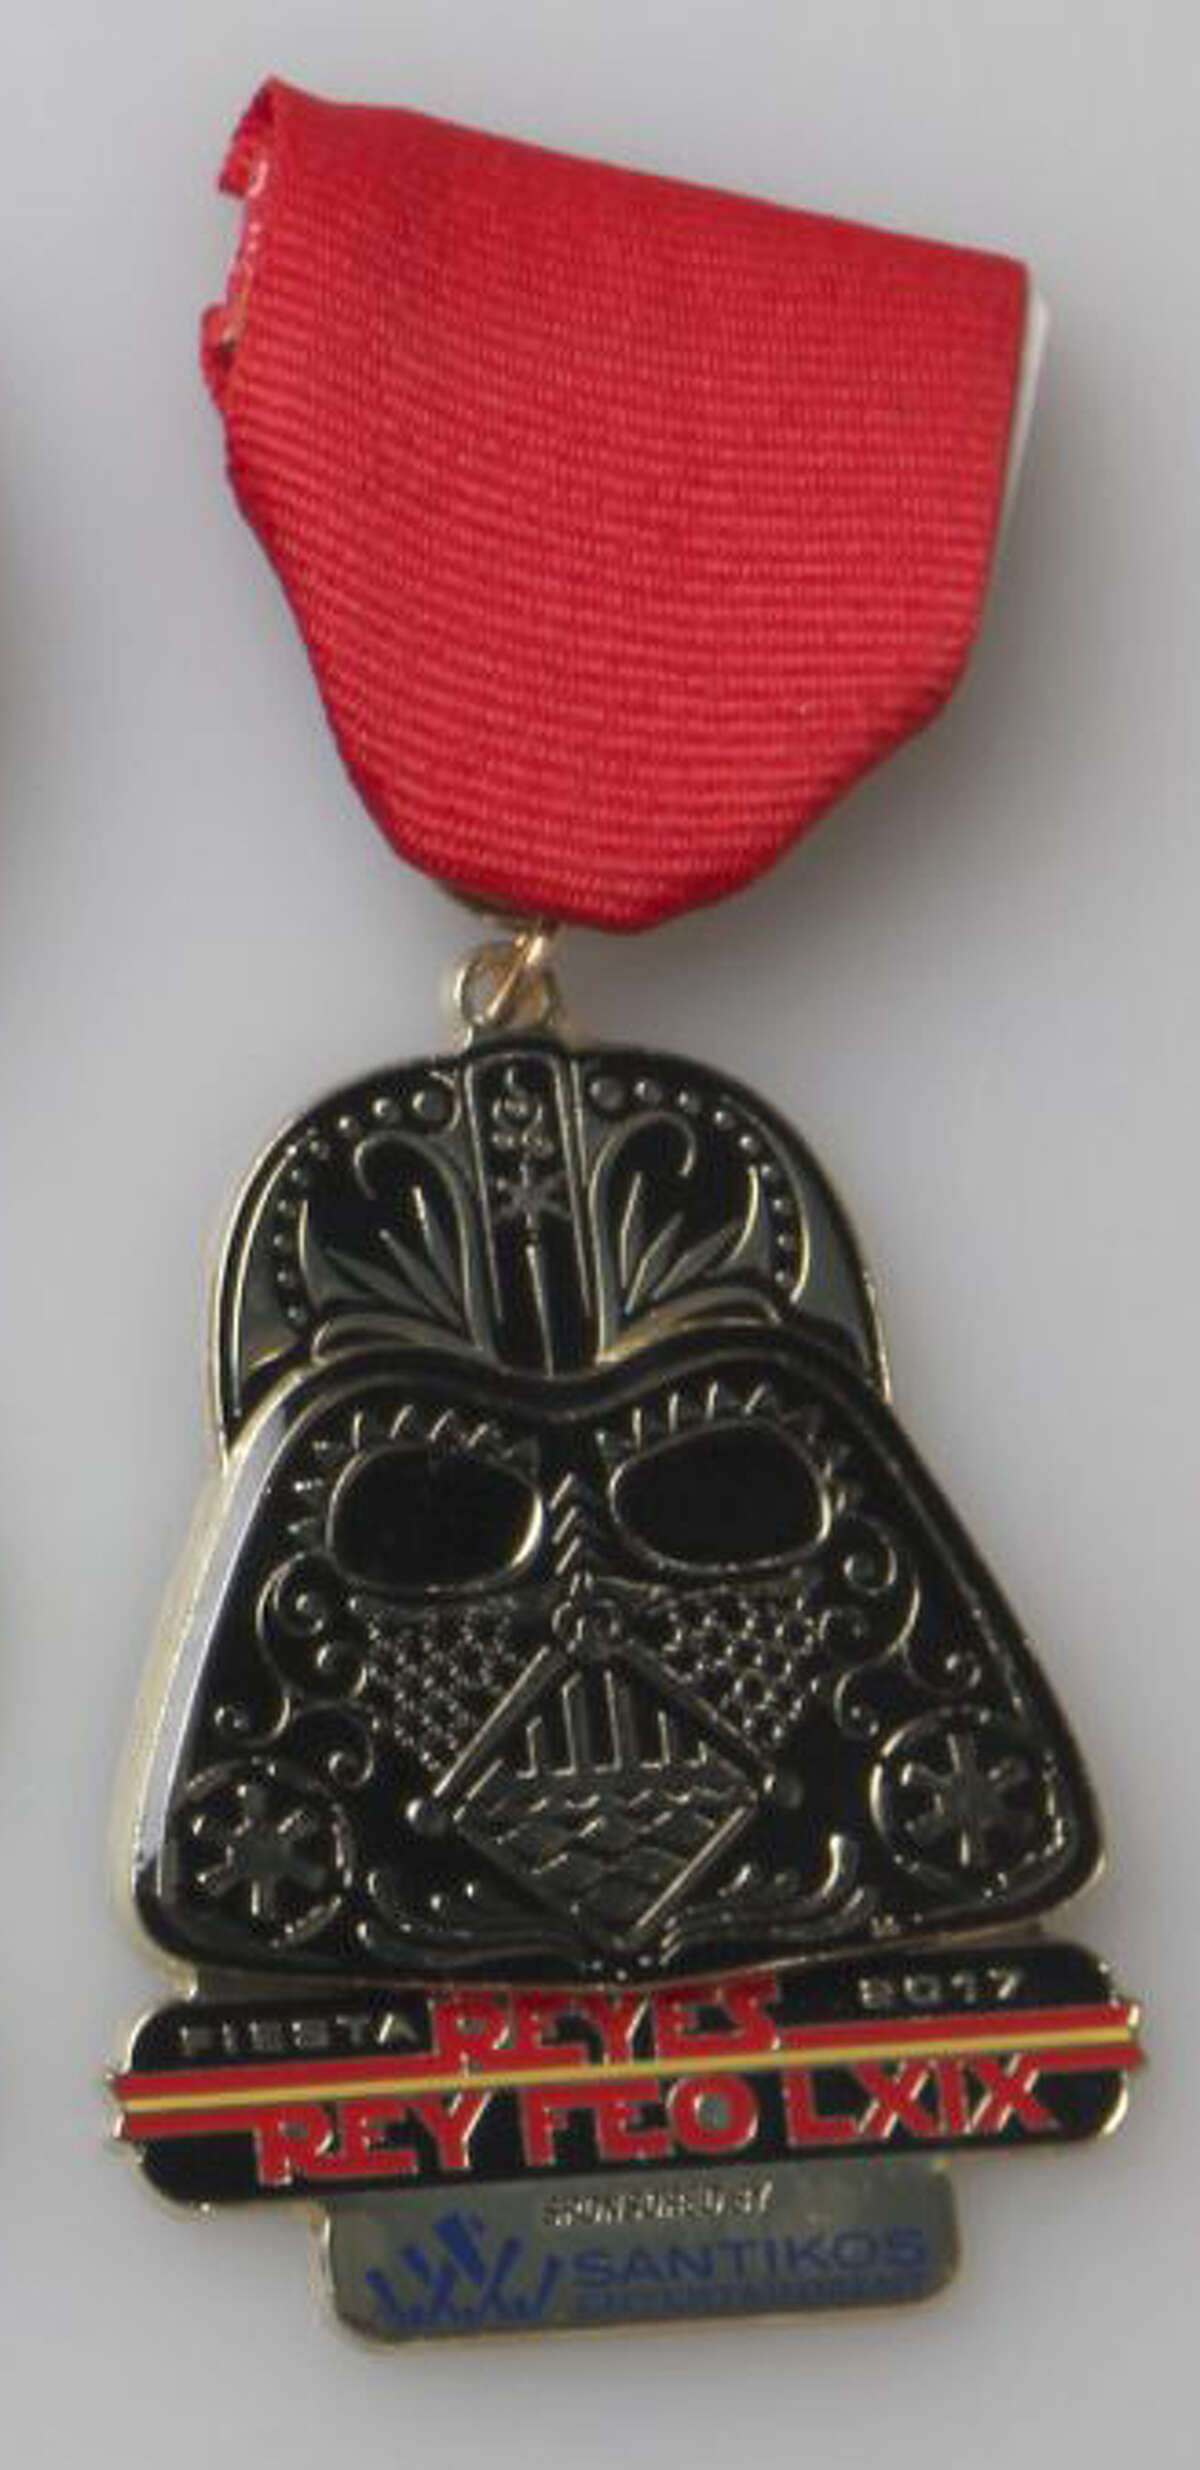 Rey Feo Fred Reyes?’ ?“Star Wars?” Fiesta medals are a force to be reckoned with this year. Sponsored by Santikos Entertainment, Reyes?’ medals consist of Darth Vader.